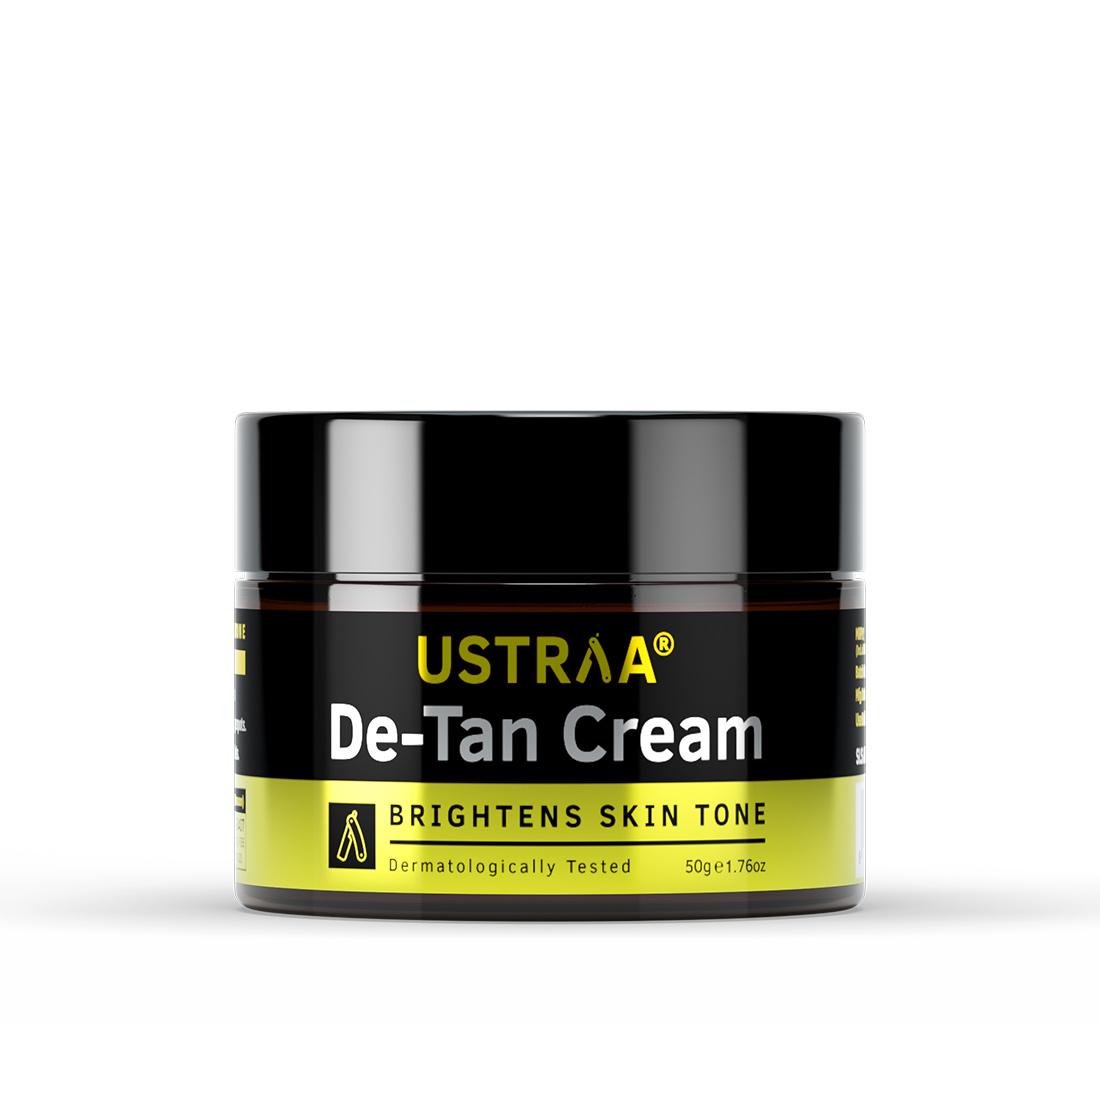 Ustraa De-Tan Cream for Men - Tan removal and Even Skin tone, Skin Lightening Cream without Bleach, With Japanese Yuzu and Liquorice, 50g